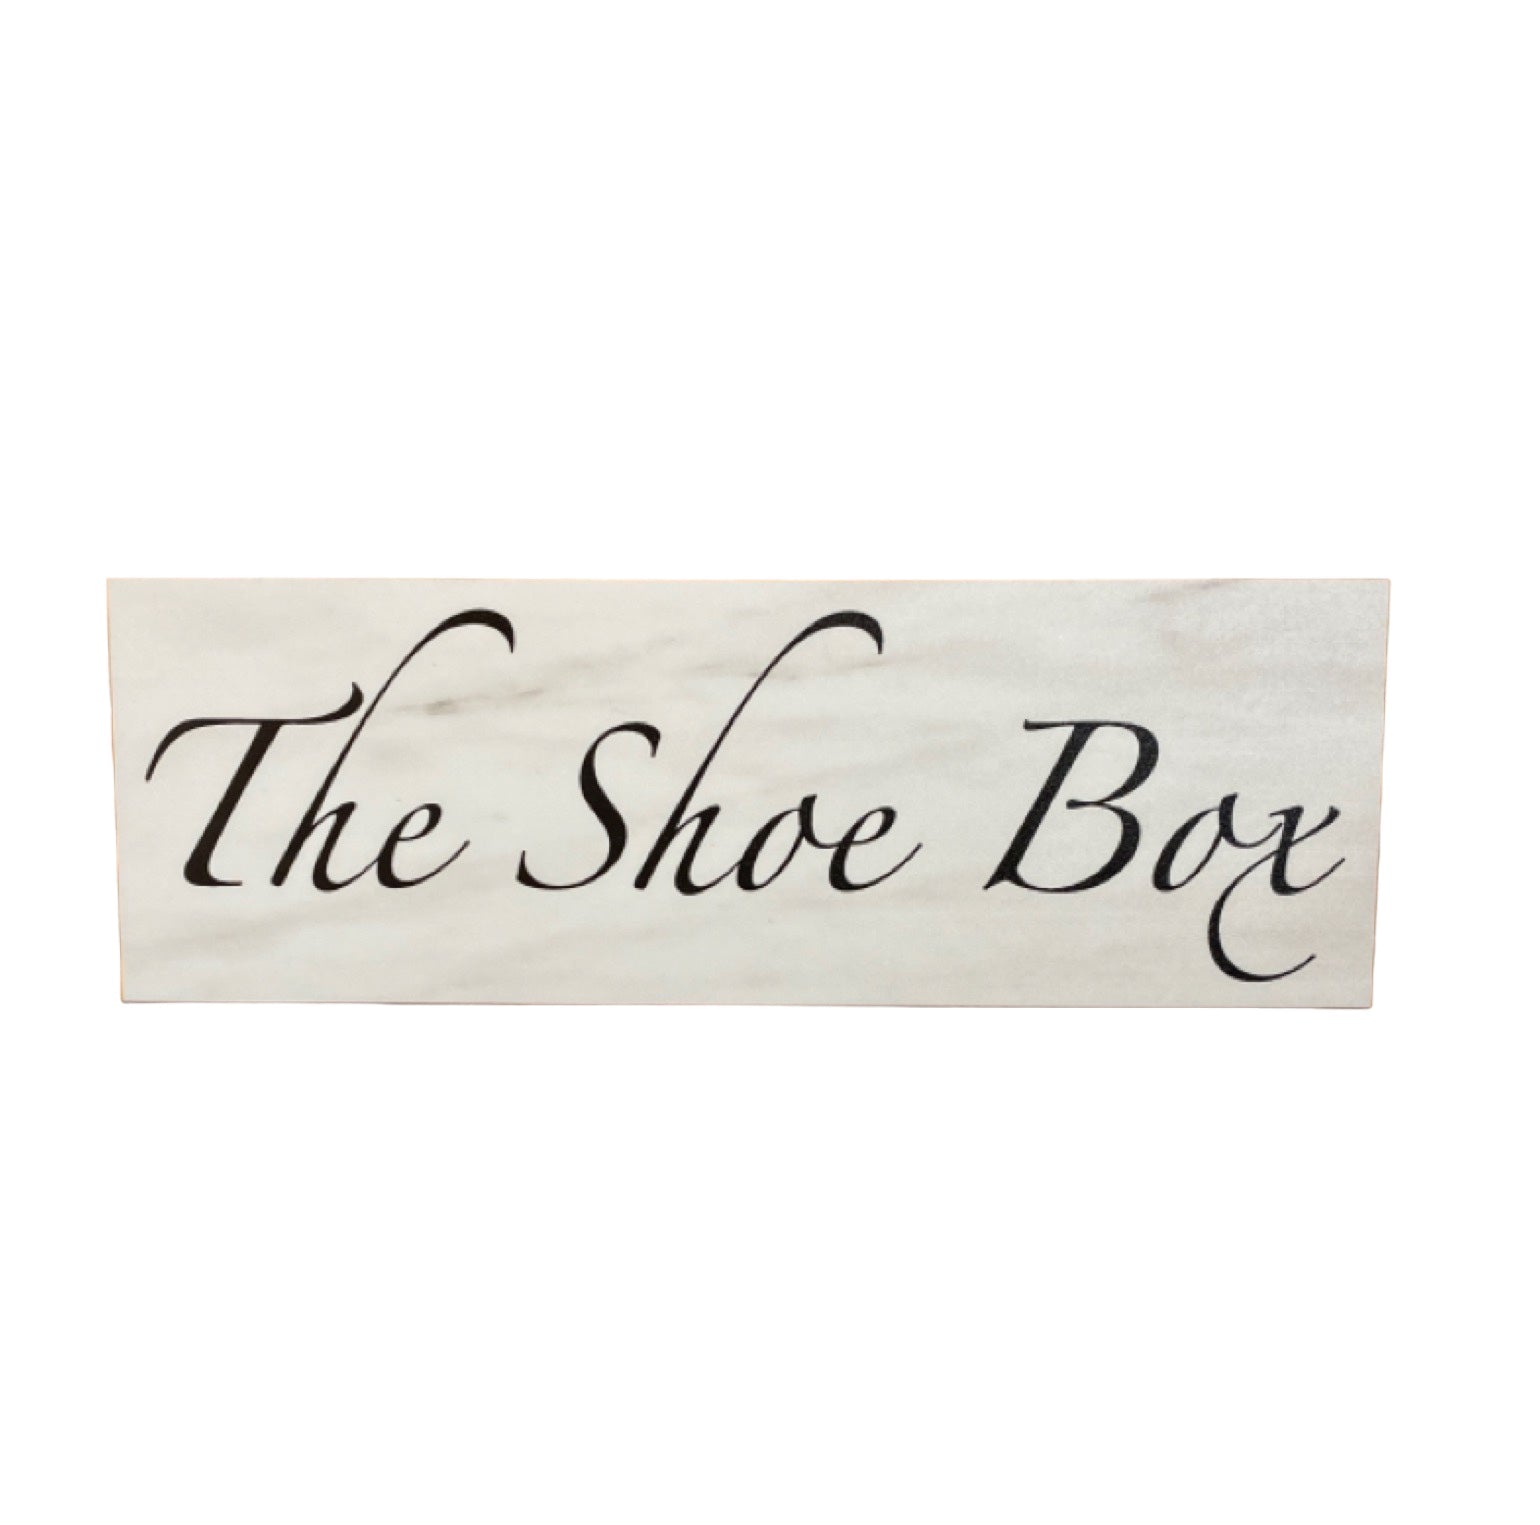 The Shoe Box Sign - The Renmy Store Homewares & Gifts 